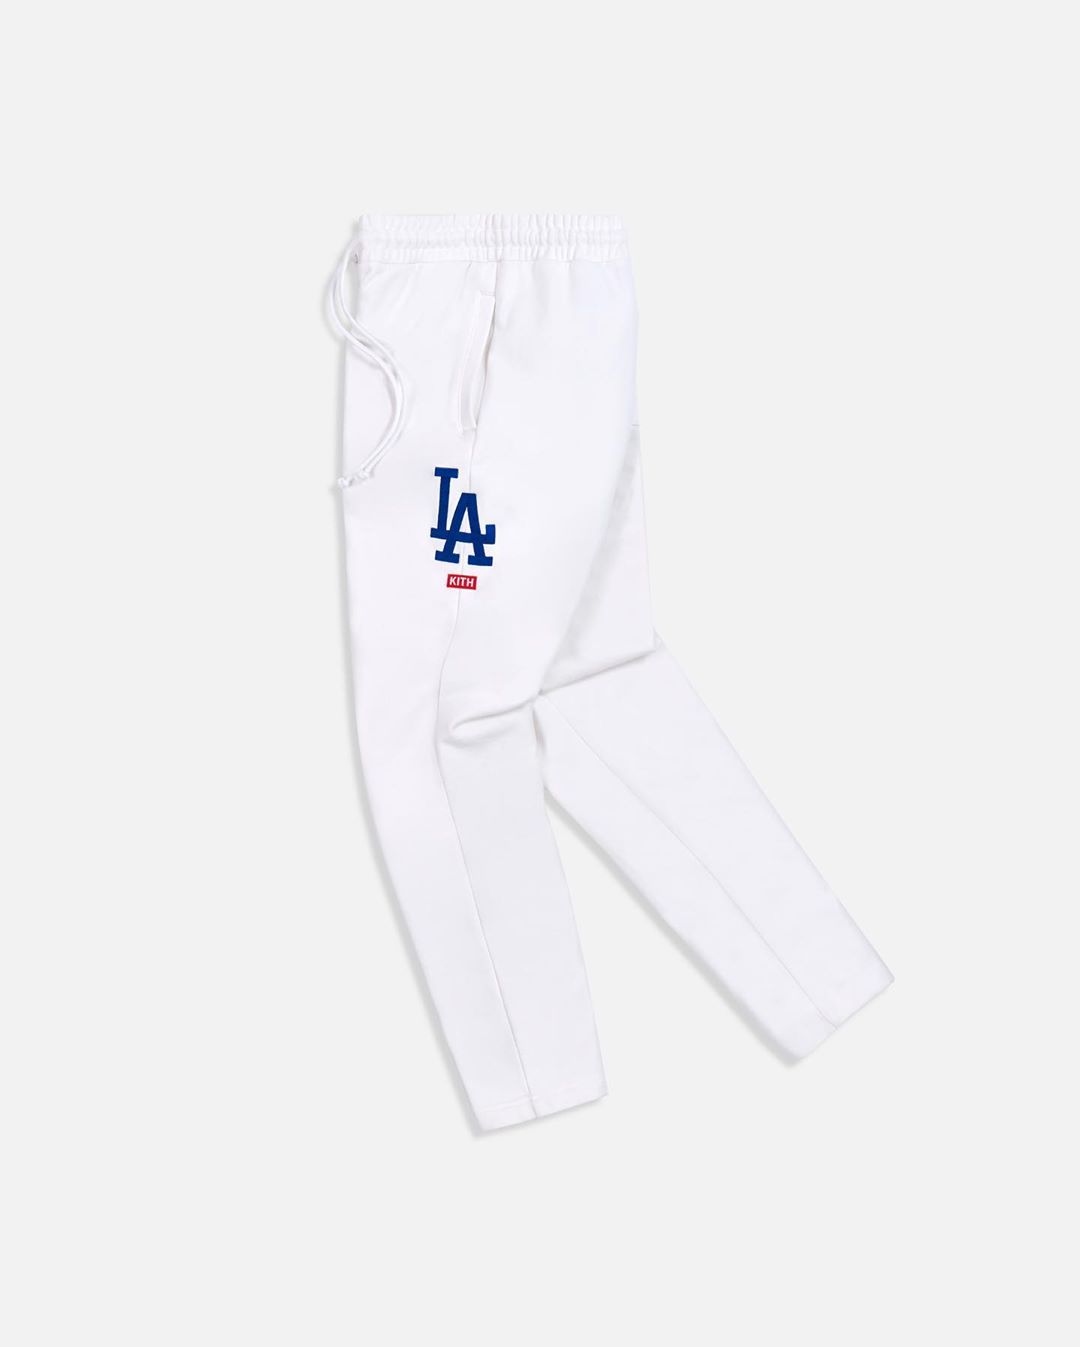 KITH × NEW YORK YANKEES & LOS ANGELES DODGERS 20AWコラボアイテムが 